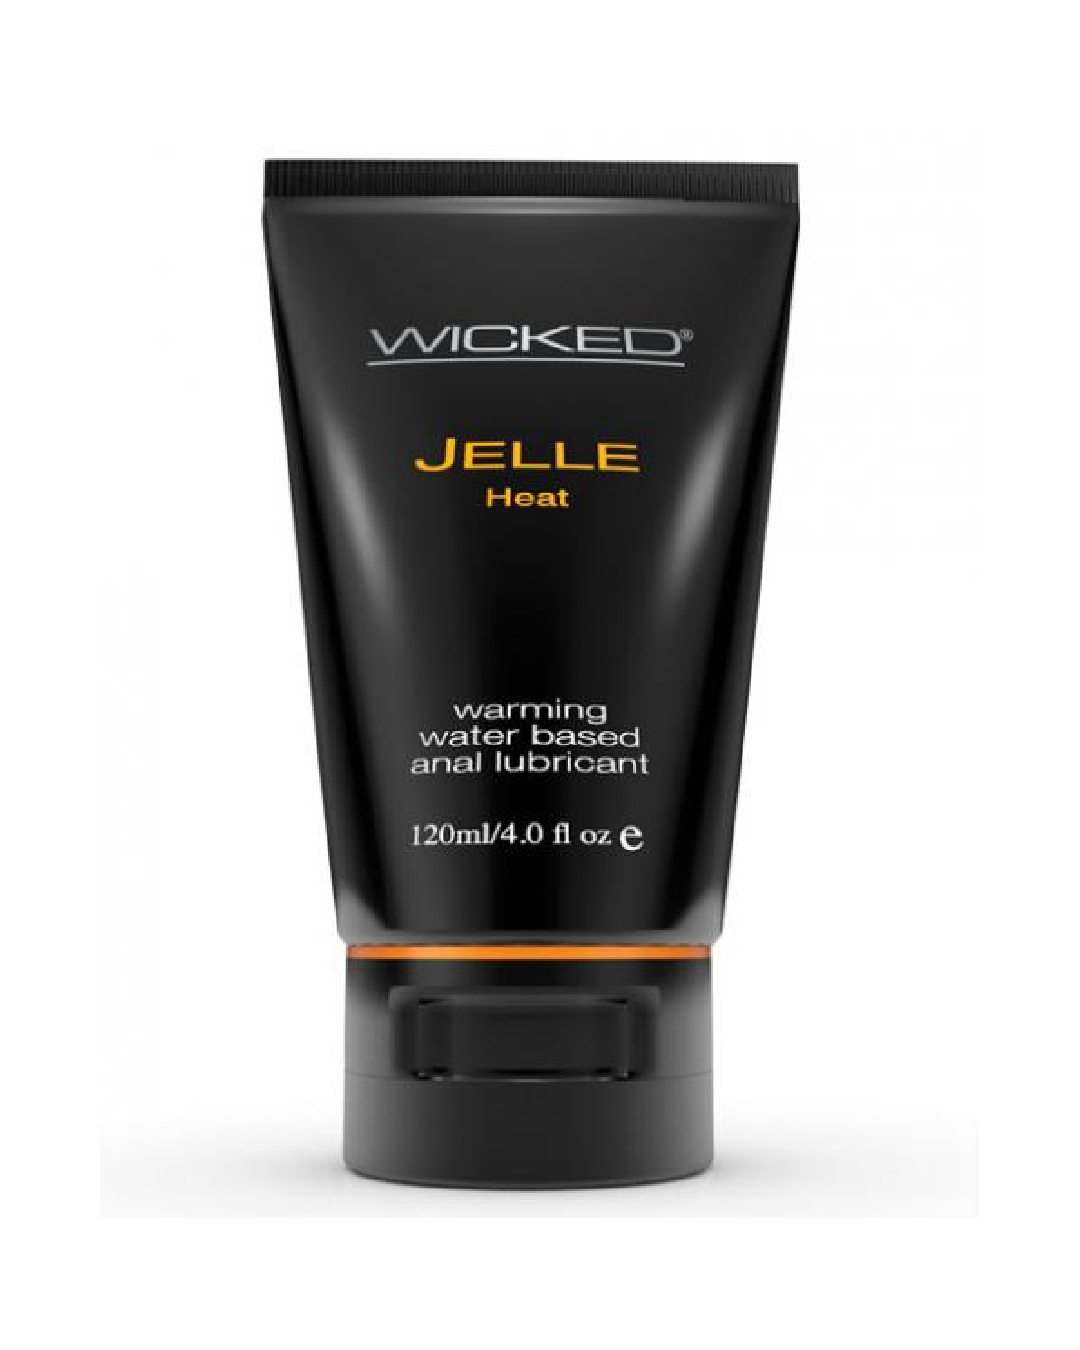 Wicked Jelle Heat Anal Lubricant bottle on white background